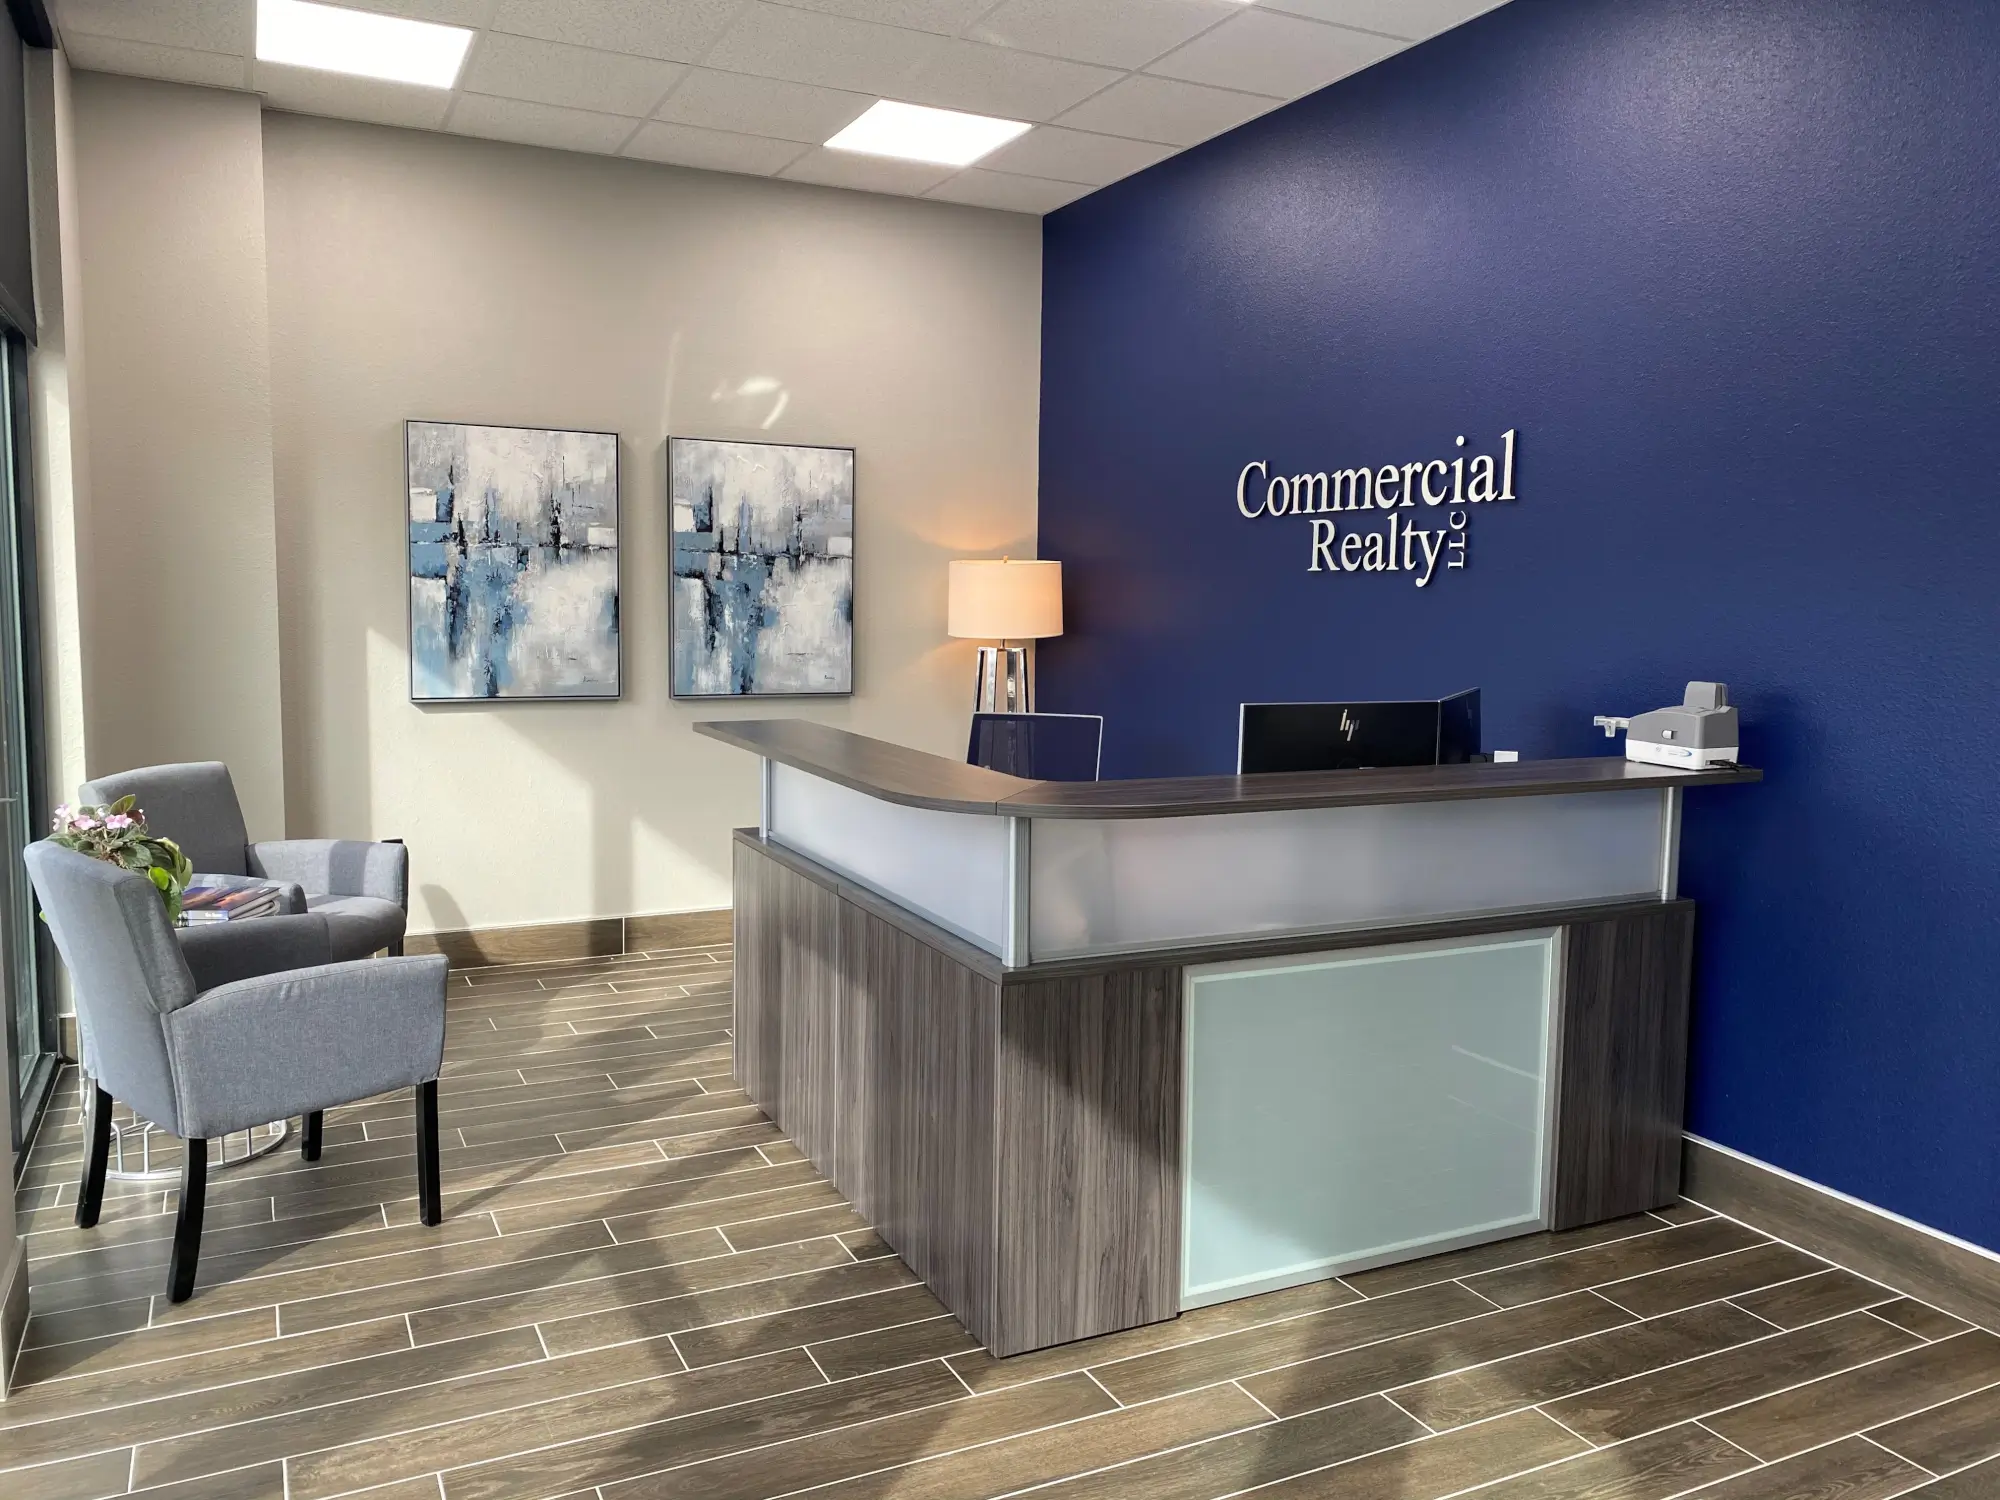 Commercial Realty lobby